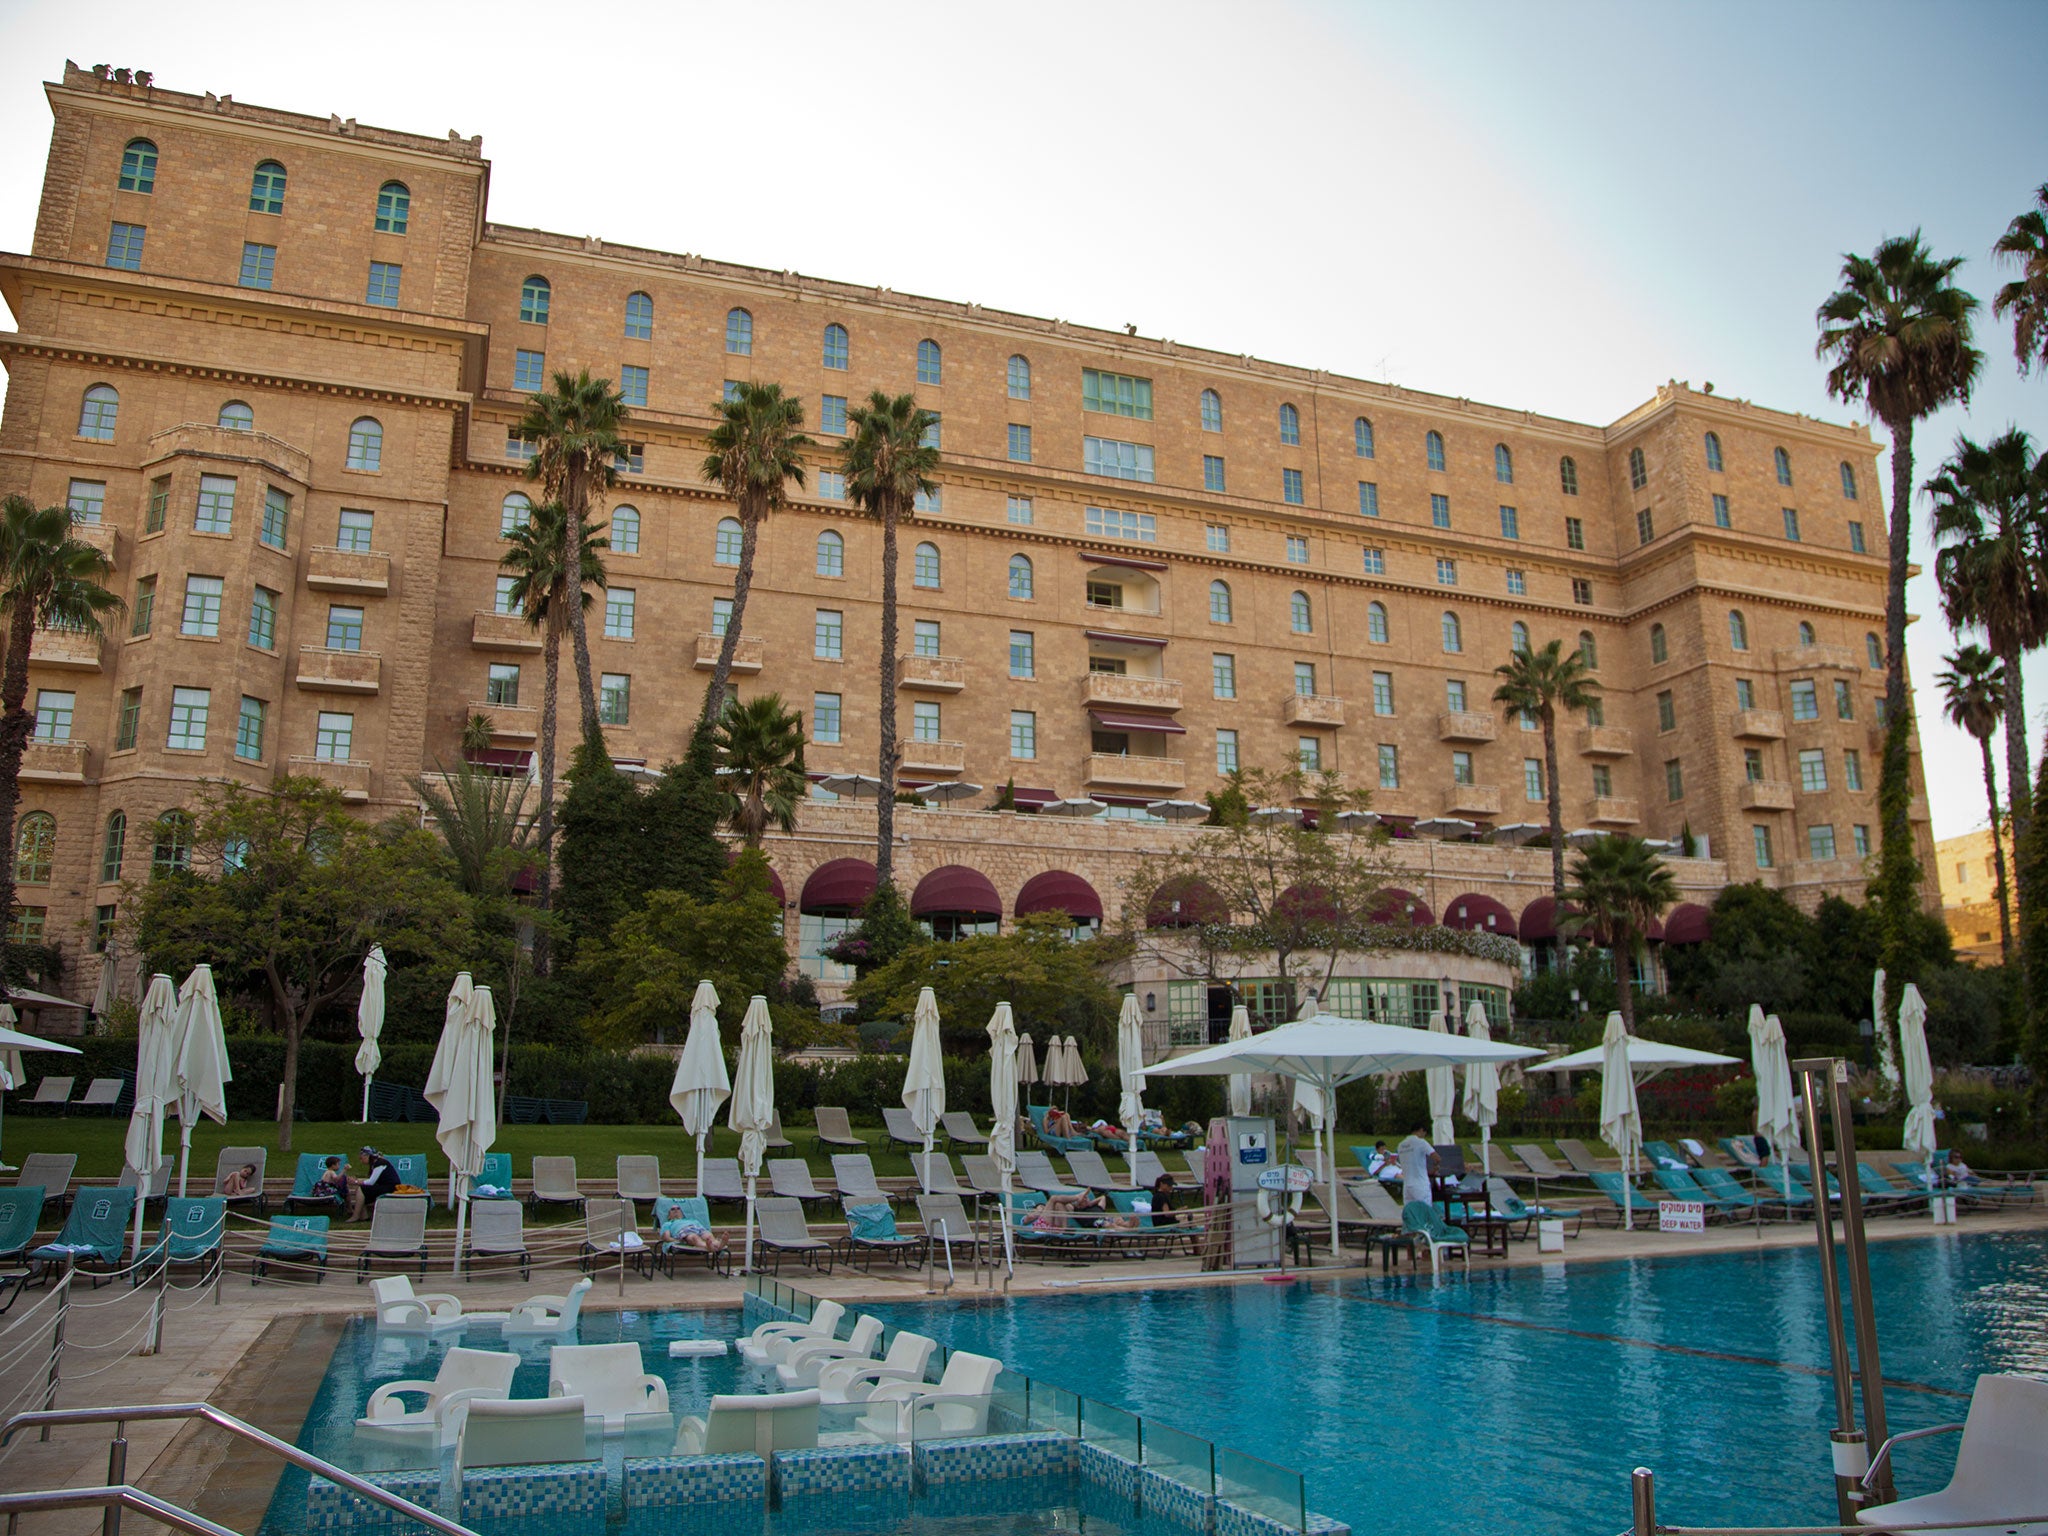 Legendary: Barack Obama has stayed at the King David Hotel in Israel, which was built in 1931